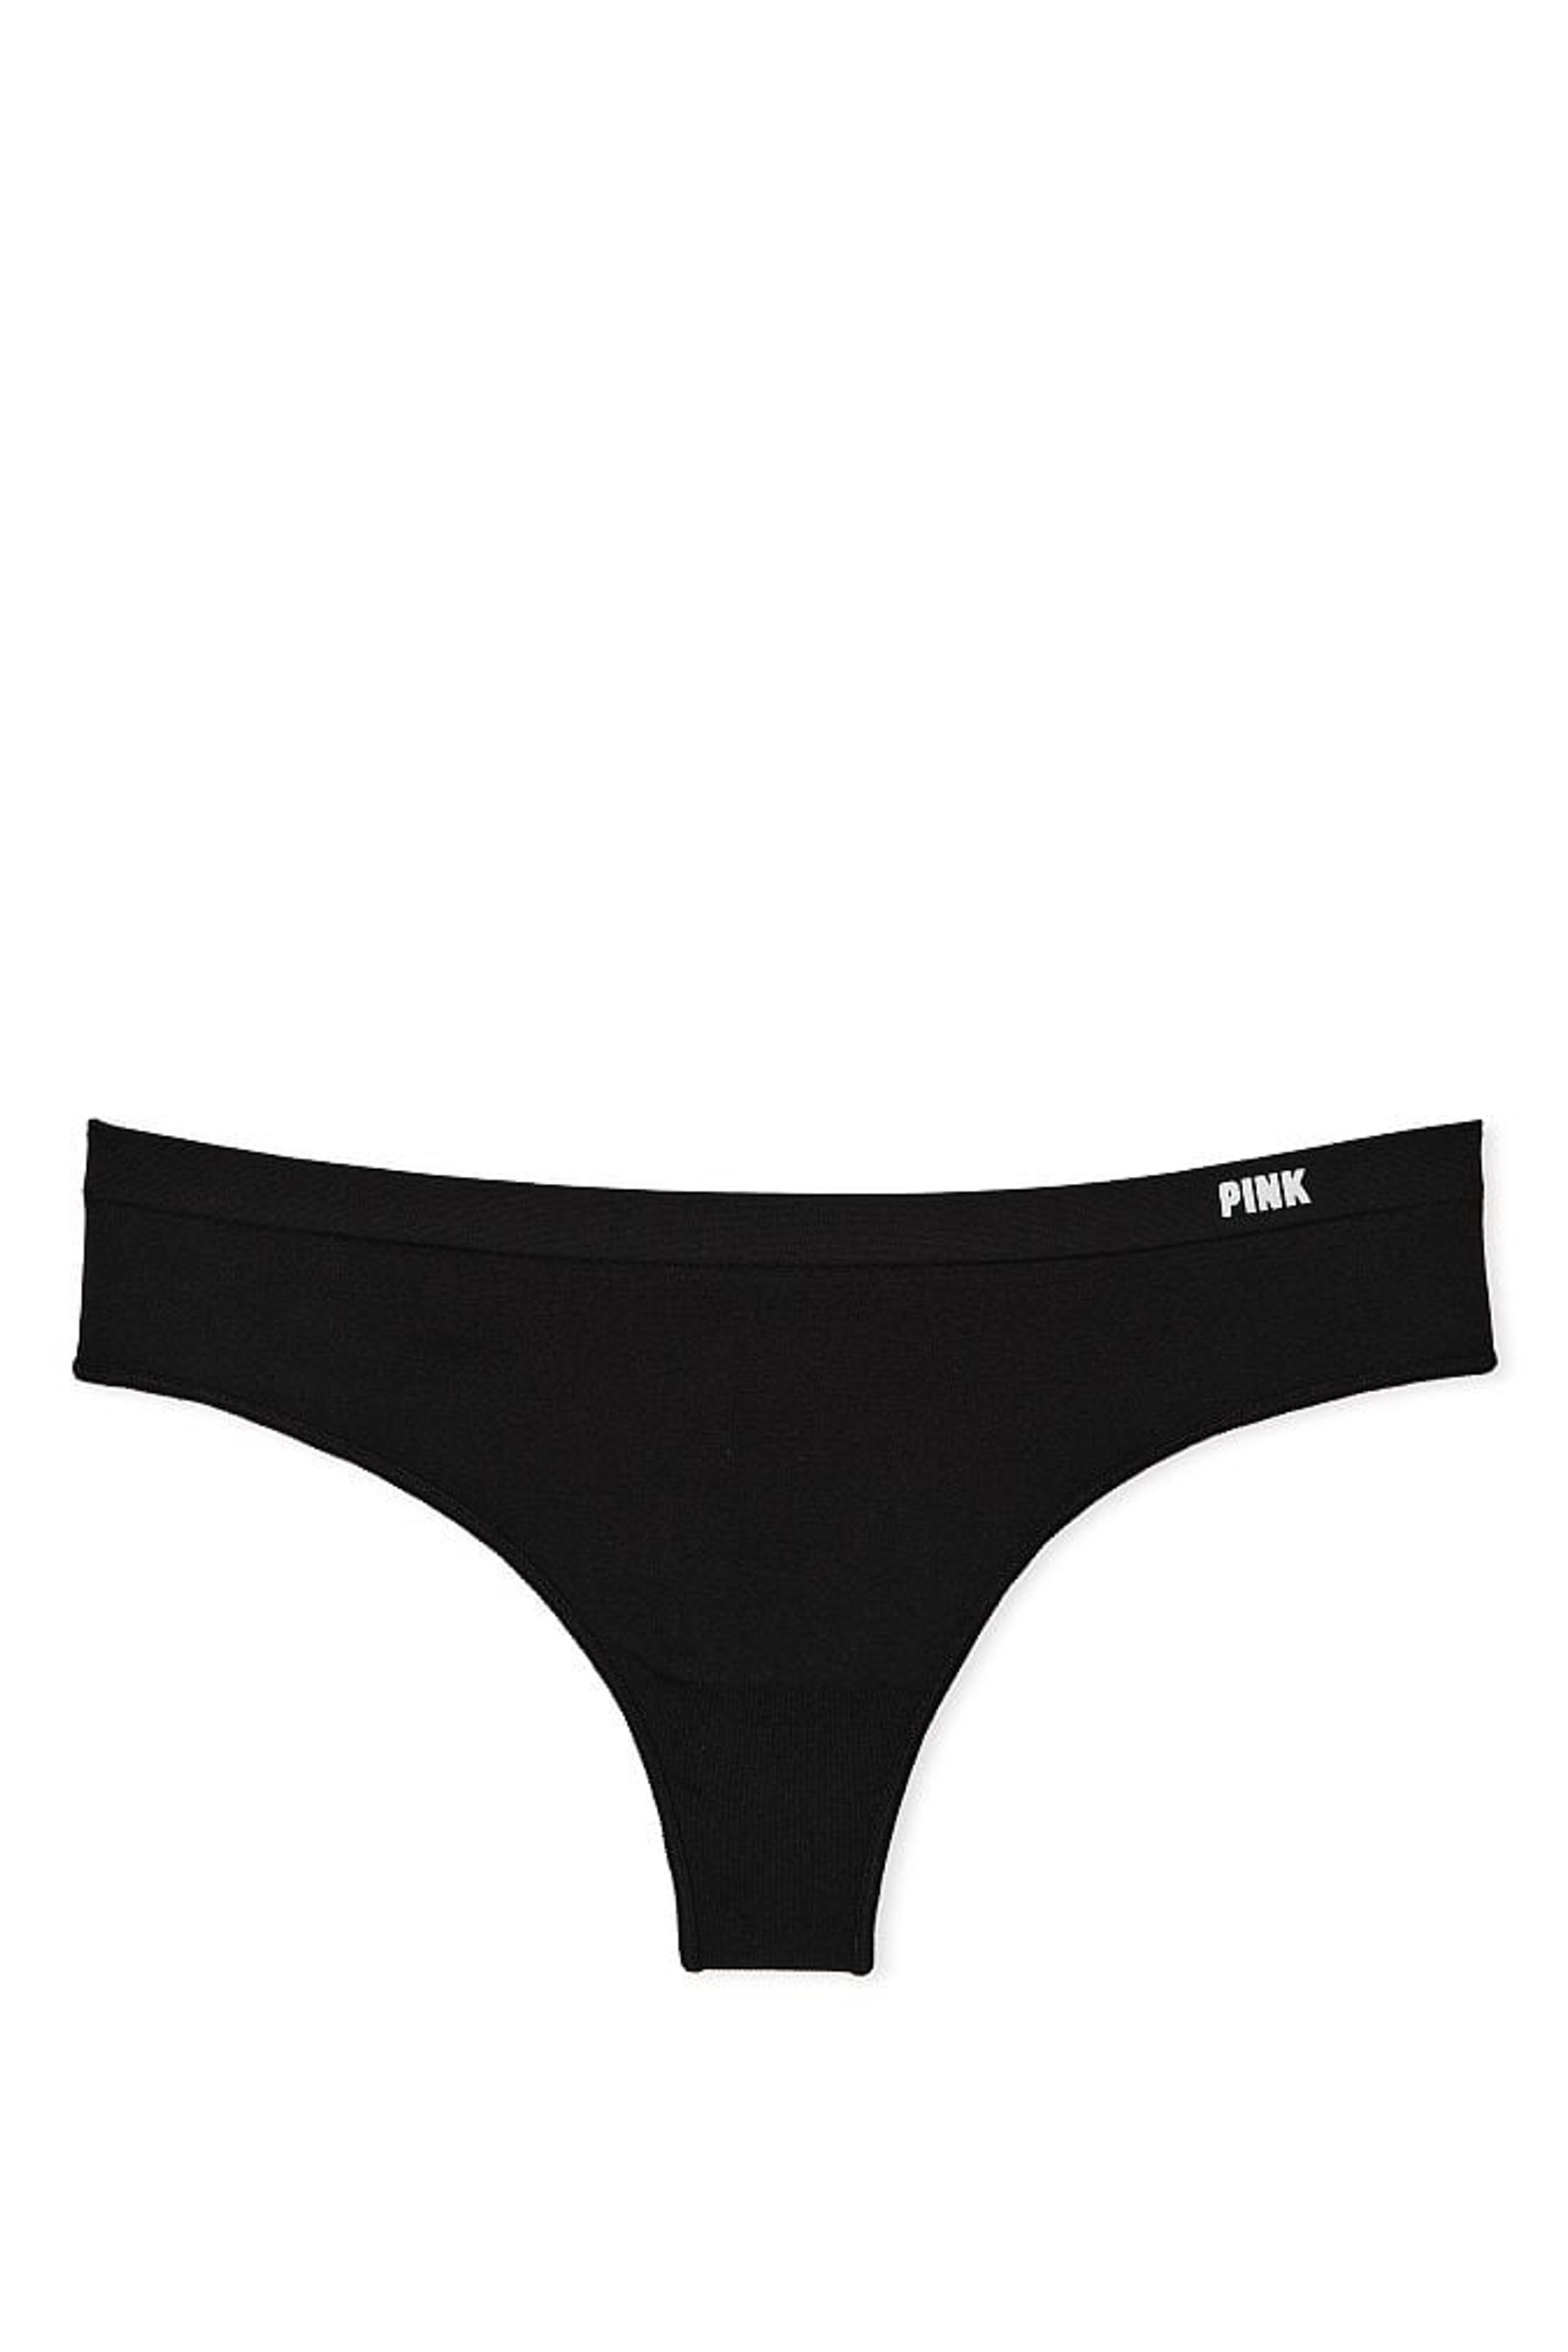 Buy Victoria's Secret PINK Pure Black Thong Seamless Knickers from the ...